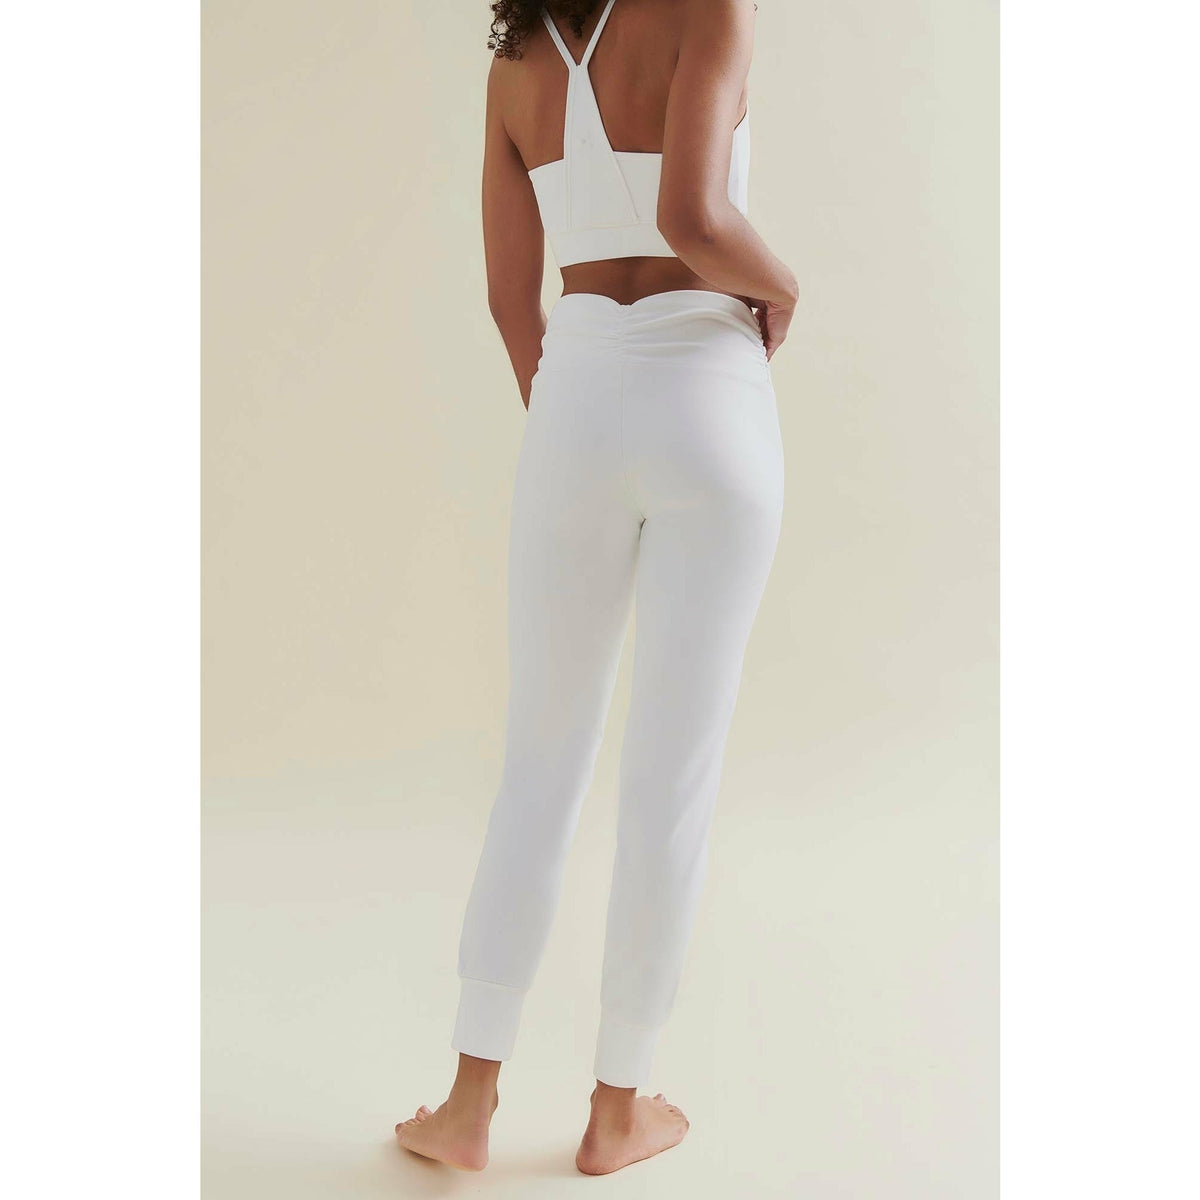 womens yoga pants in white by welliciouys model showing back 